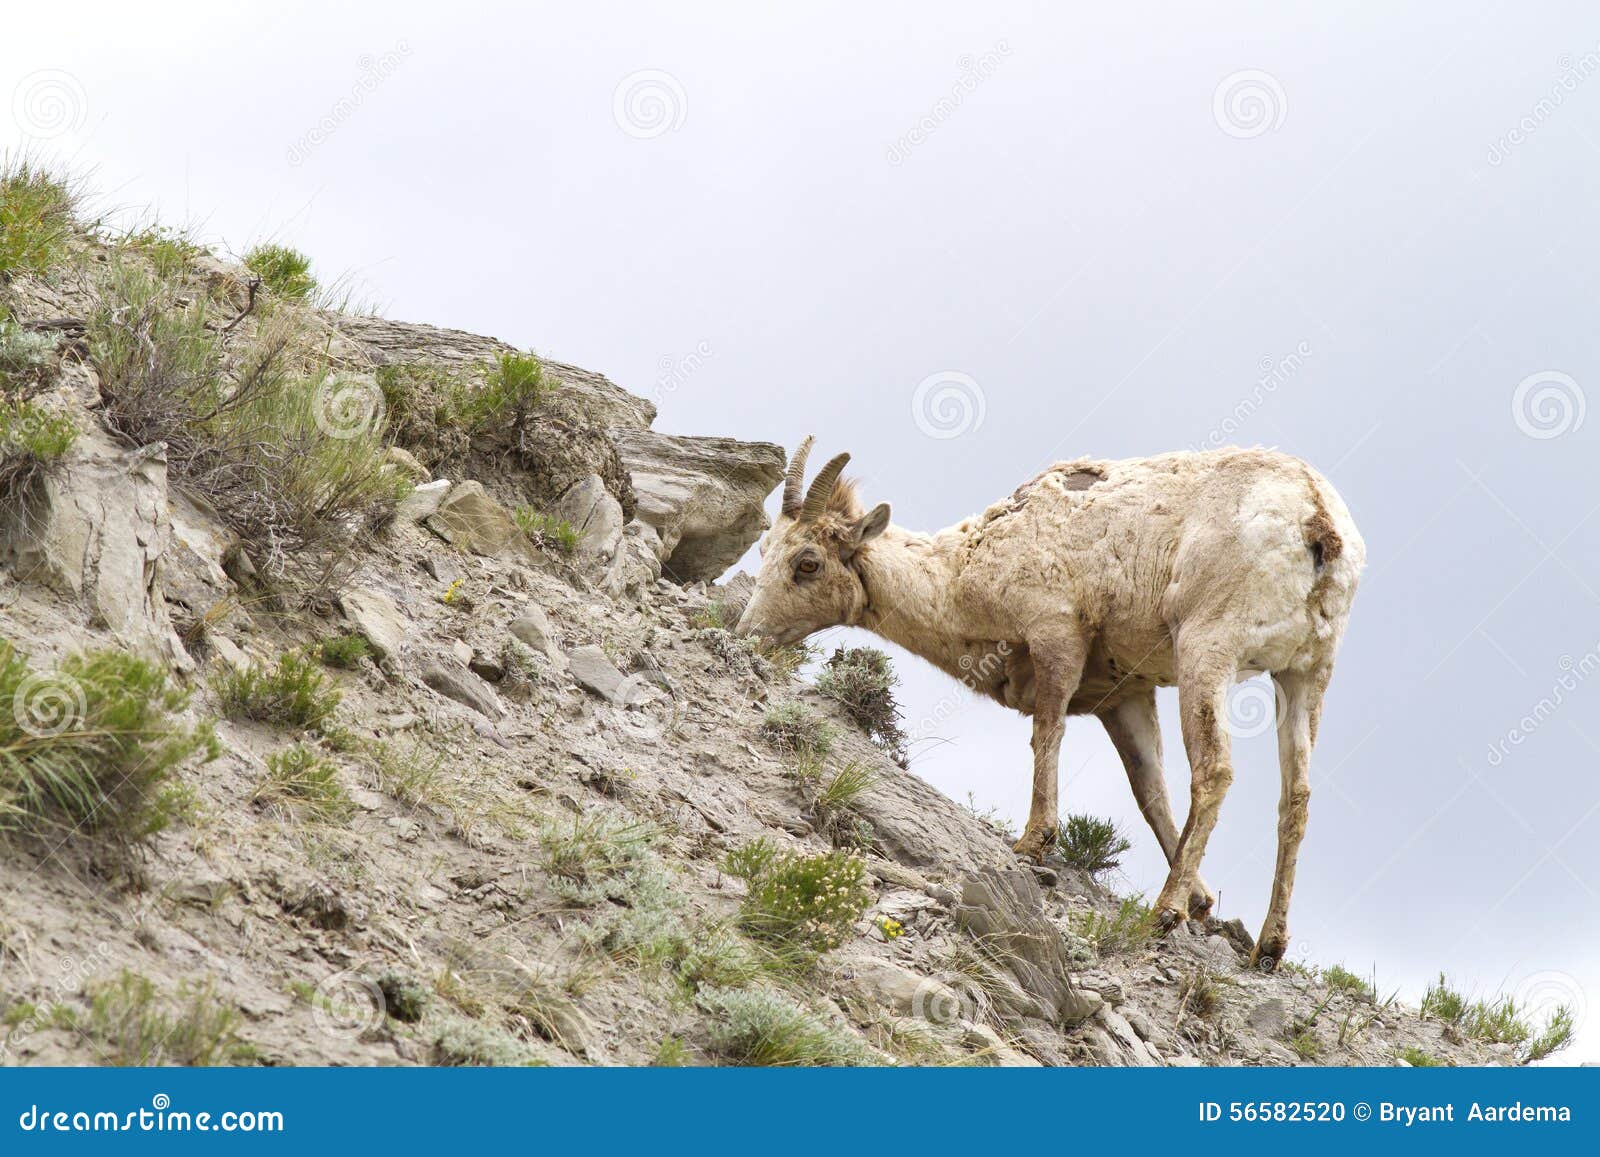 Female Big Horn Sheep eating on a hill side